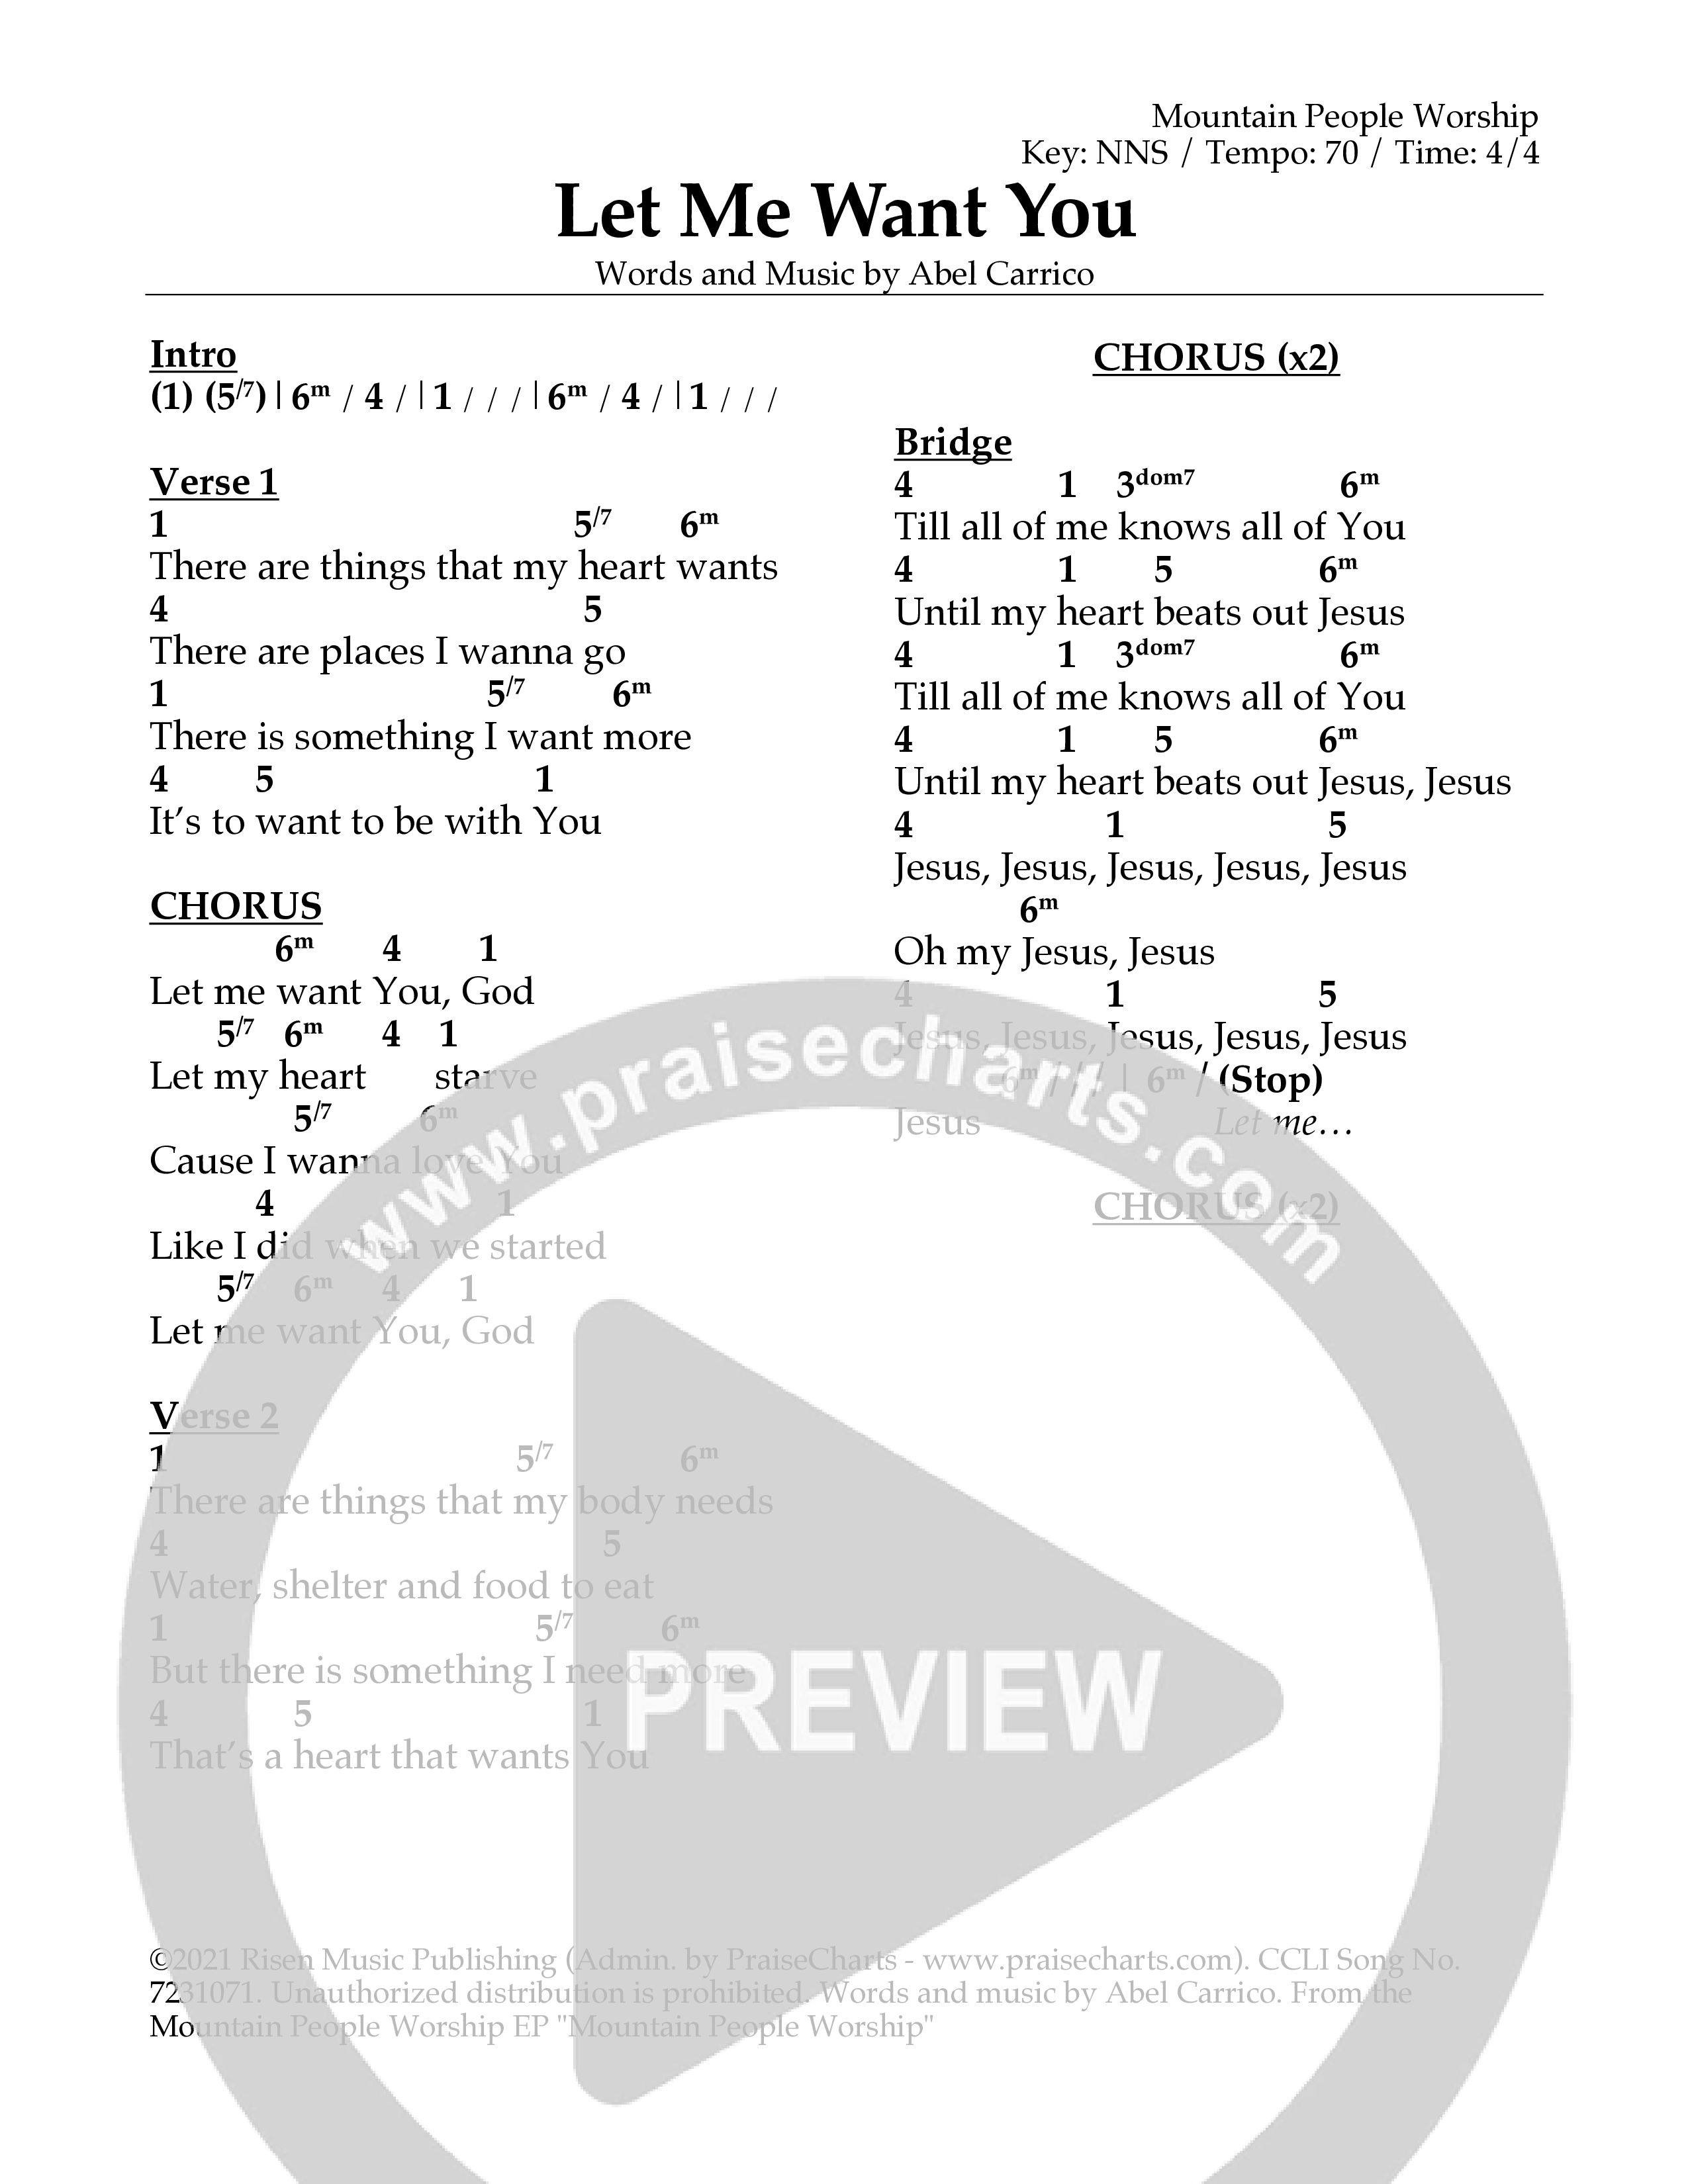 Let Me Want You Chord Chart (Mountain People Worship)